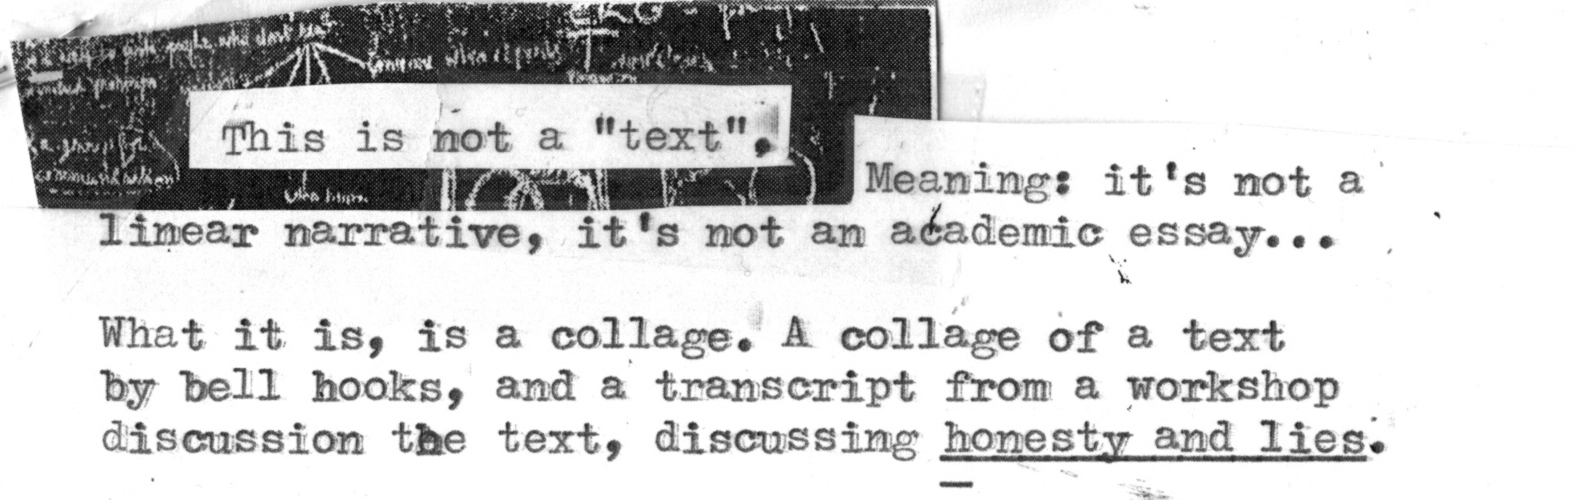 This is not a "text", Meaning: it's not a linear narrative, it's not an academic essay... 
What it is, is a collage. A collage of a text by bell hooks, and a transcript from a workshop discussion the text, discussing honesty and lies.